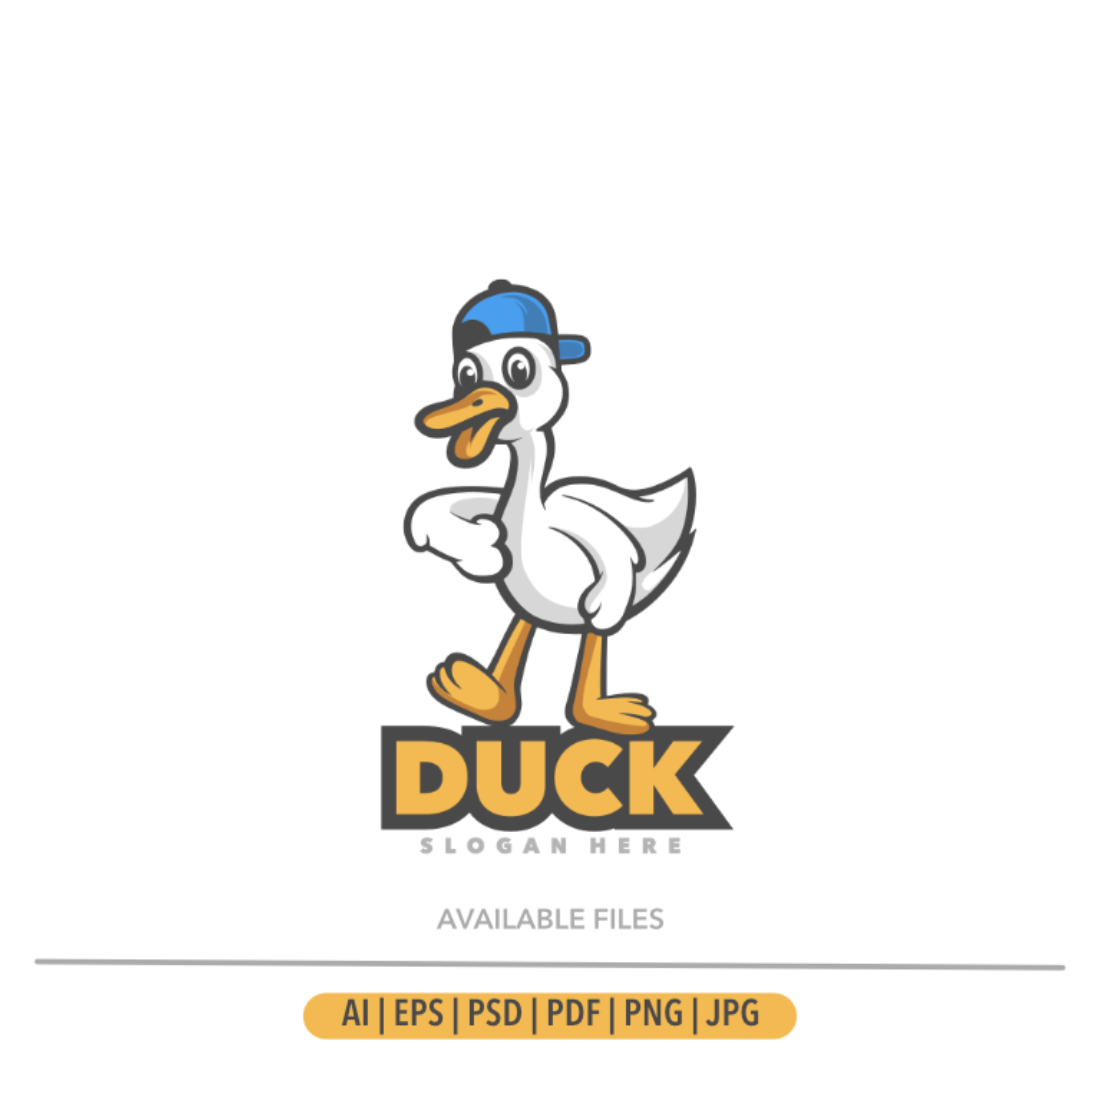 Duck logo with a hat on it.